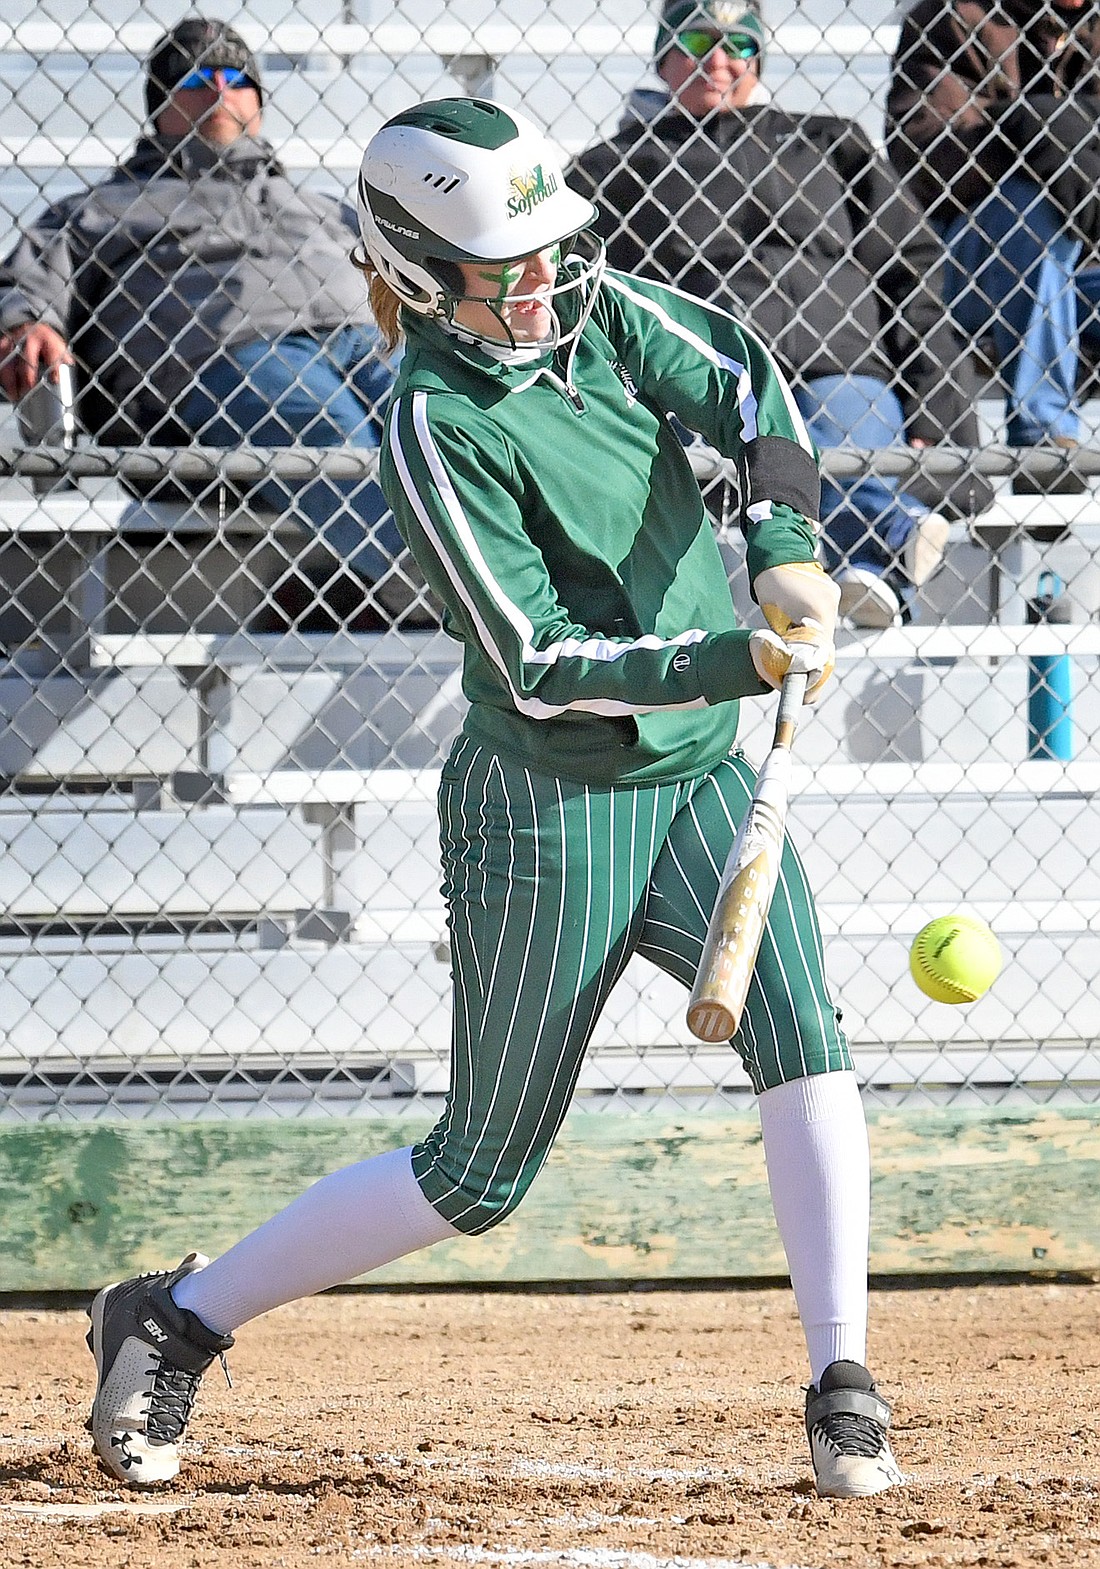 Wawasee junior Ava Couture connects with the ball for a single during Friday evening's home game against Manchester. Photo by Gary Nieter